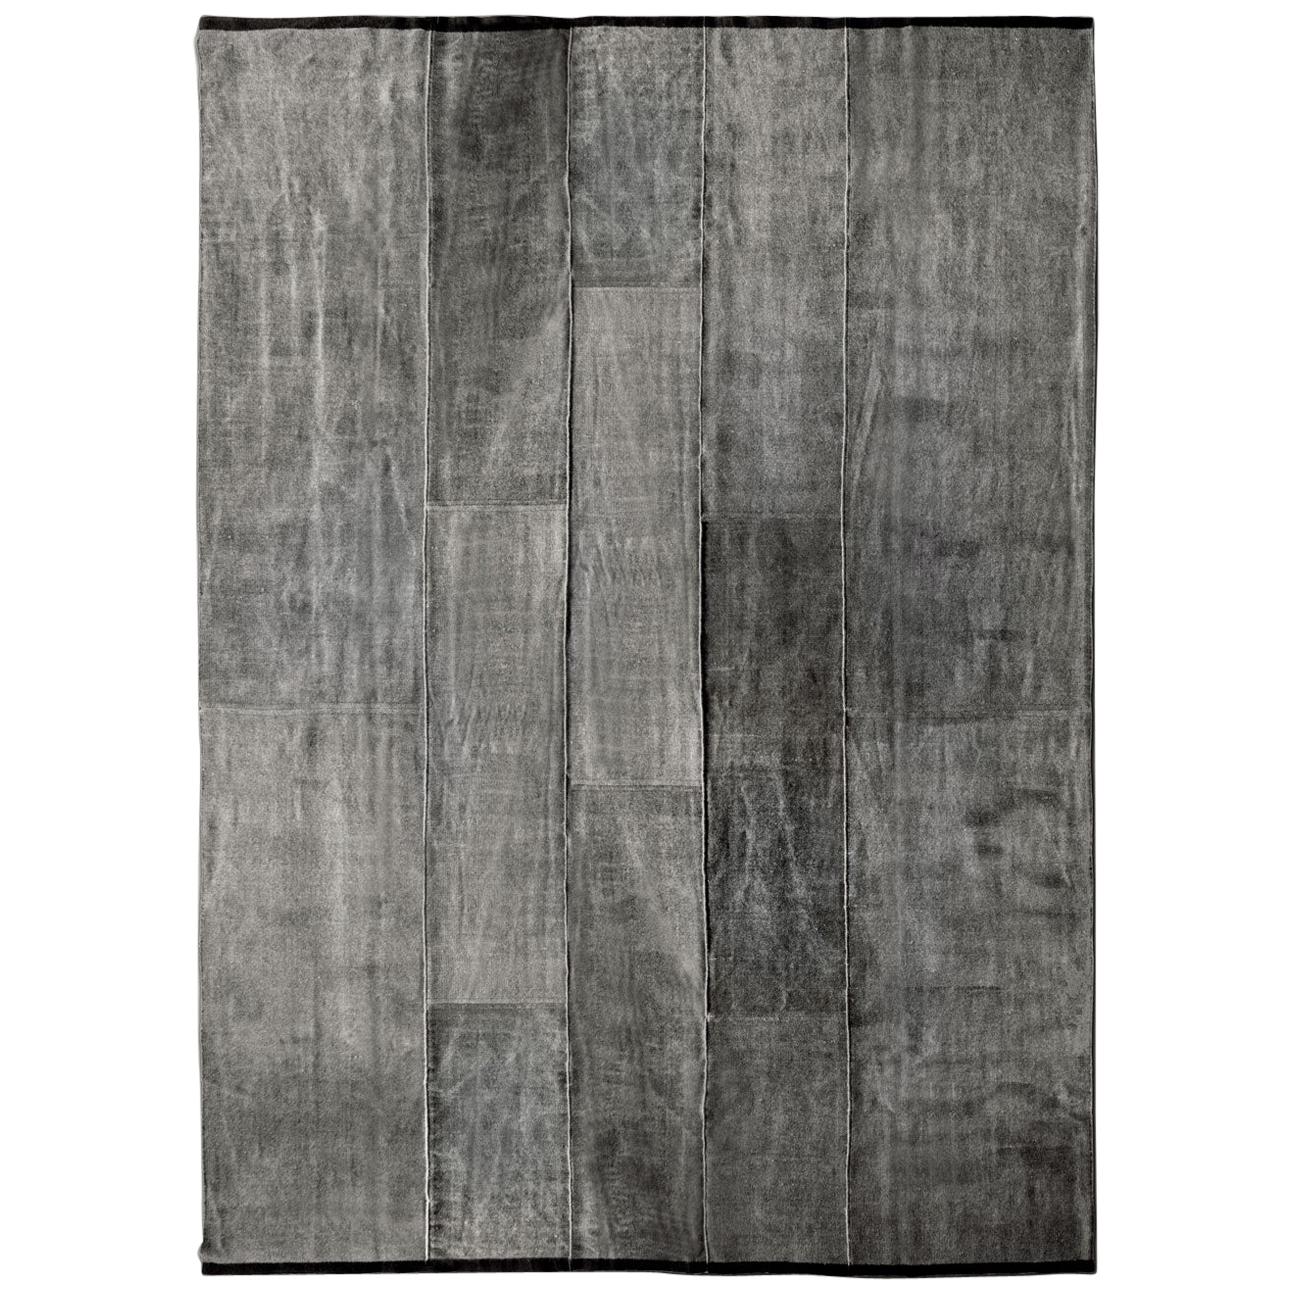 Contemporary Thin Light Natural Grey Wool Rug by Deanna Comellini 310x390 cm